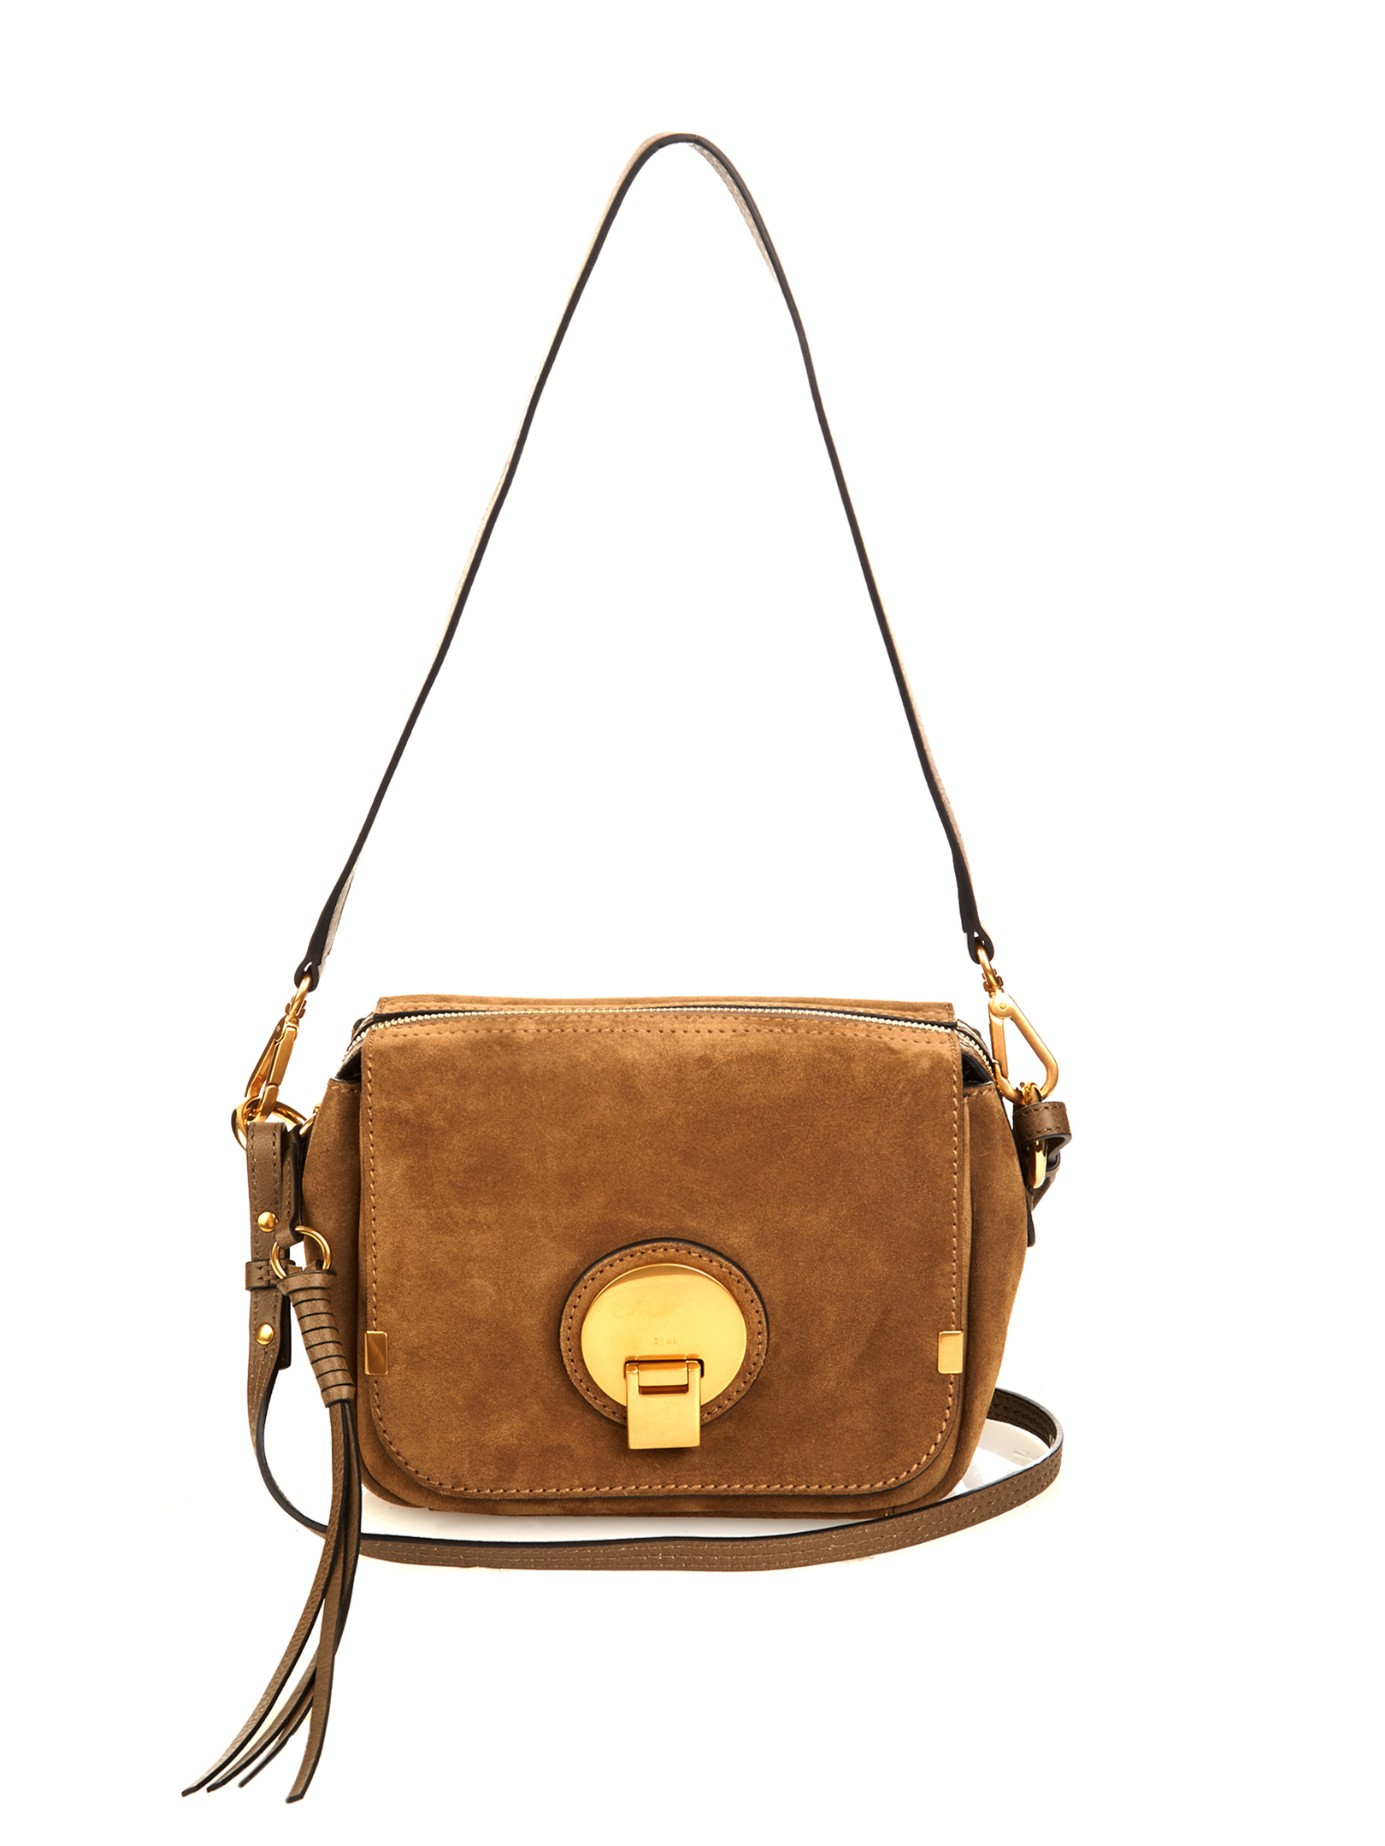 Chlo Indy Small Suede Cross-body Bag in Brown (KHAKI) | Lyst